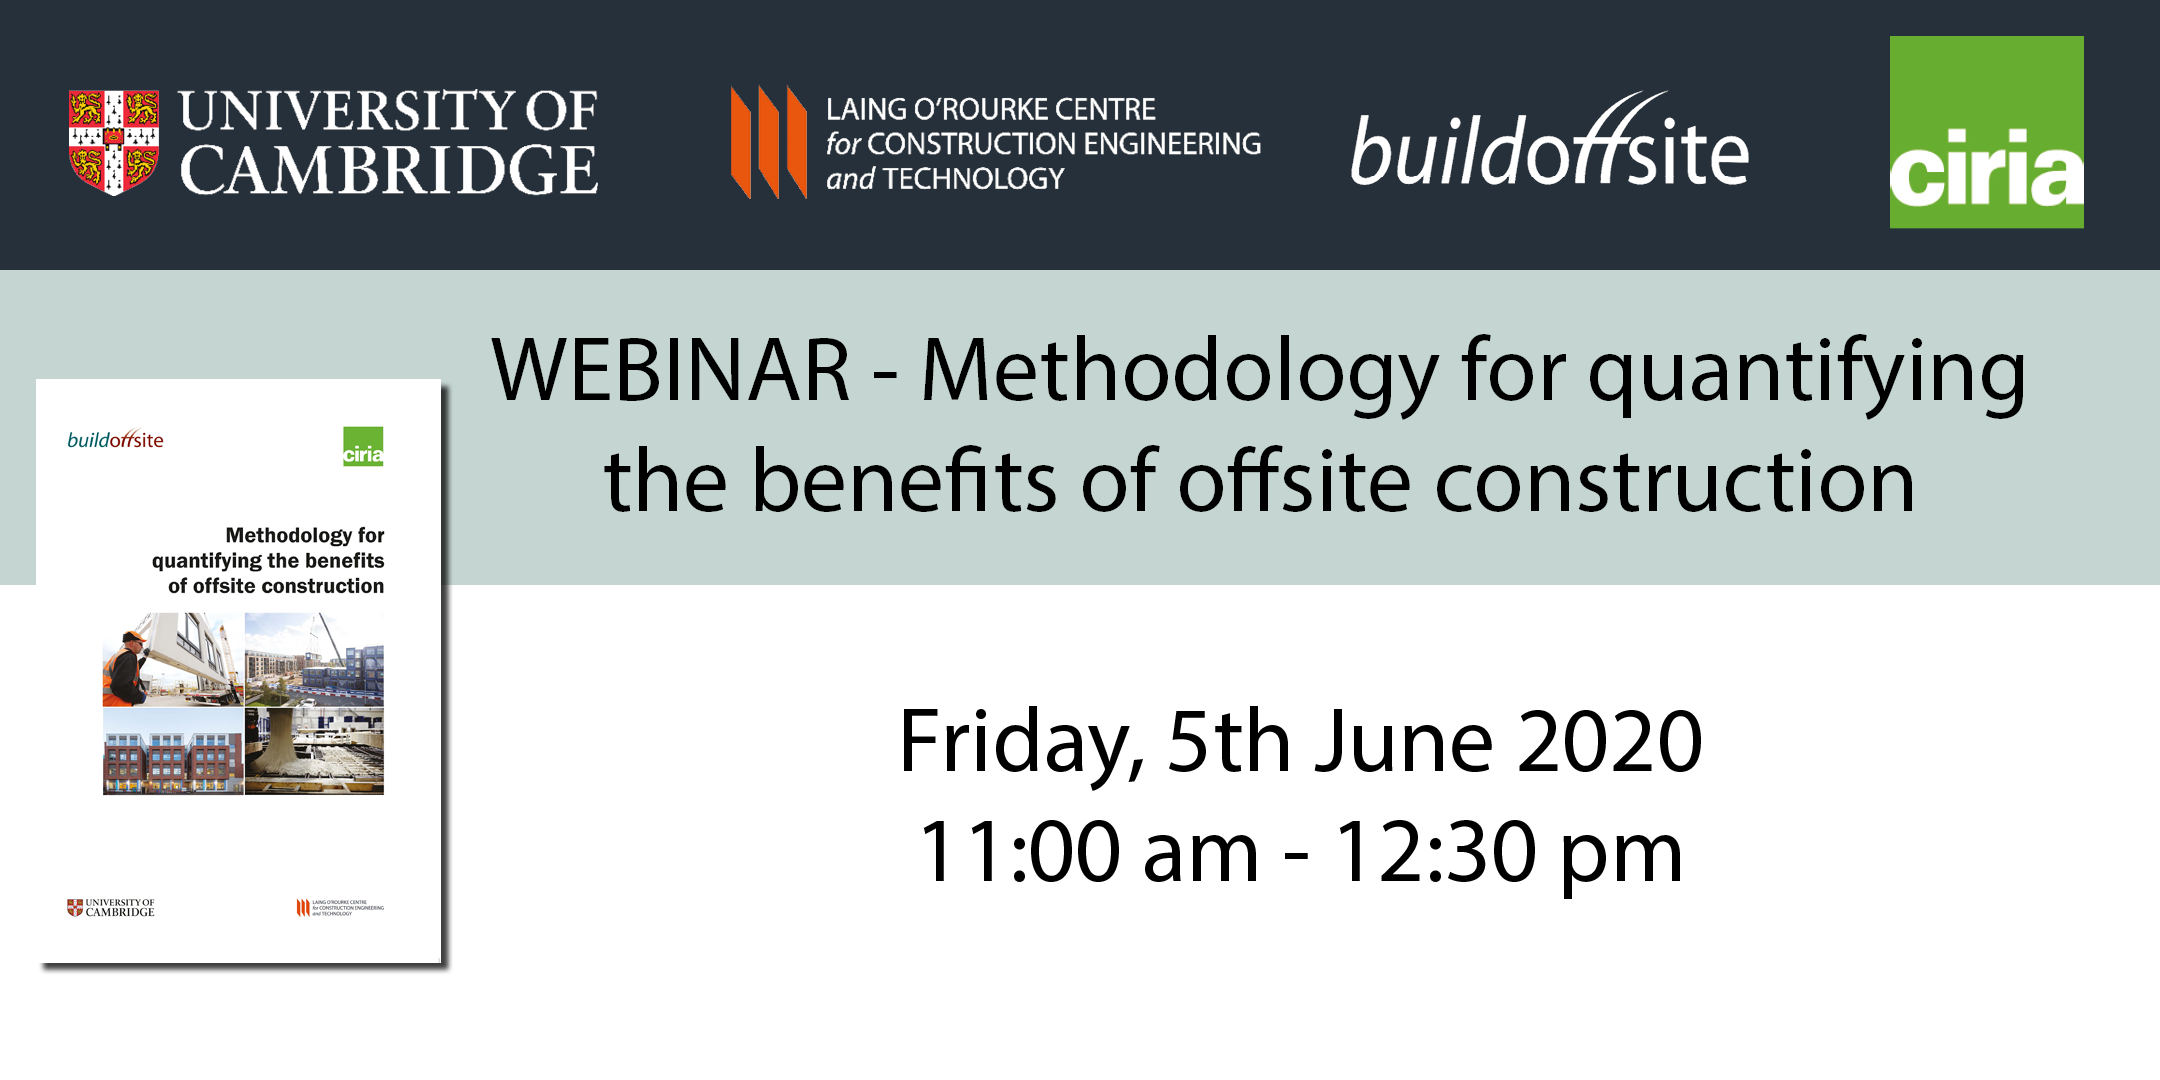 WEBINAR - Methodology for quantifying the benefits of offsite construction